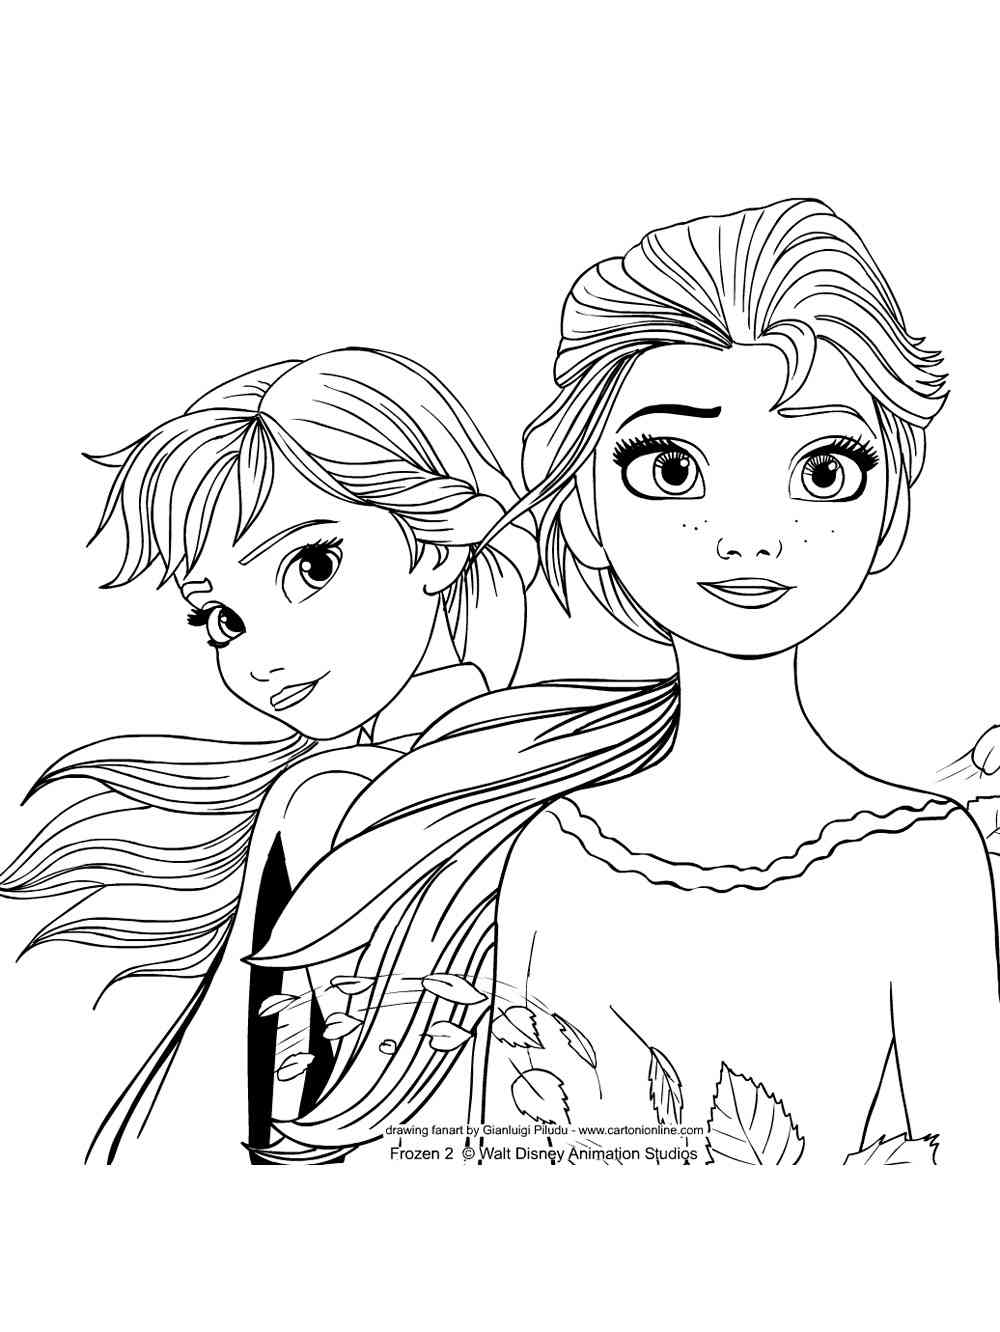 Elsa and Anna 6 coloring page